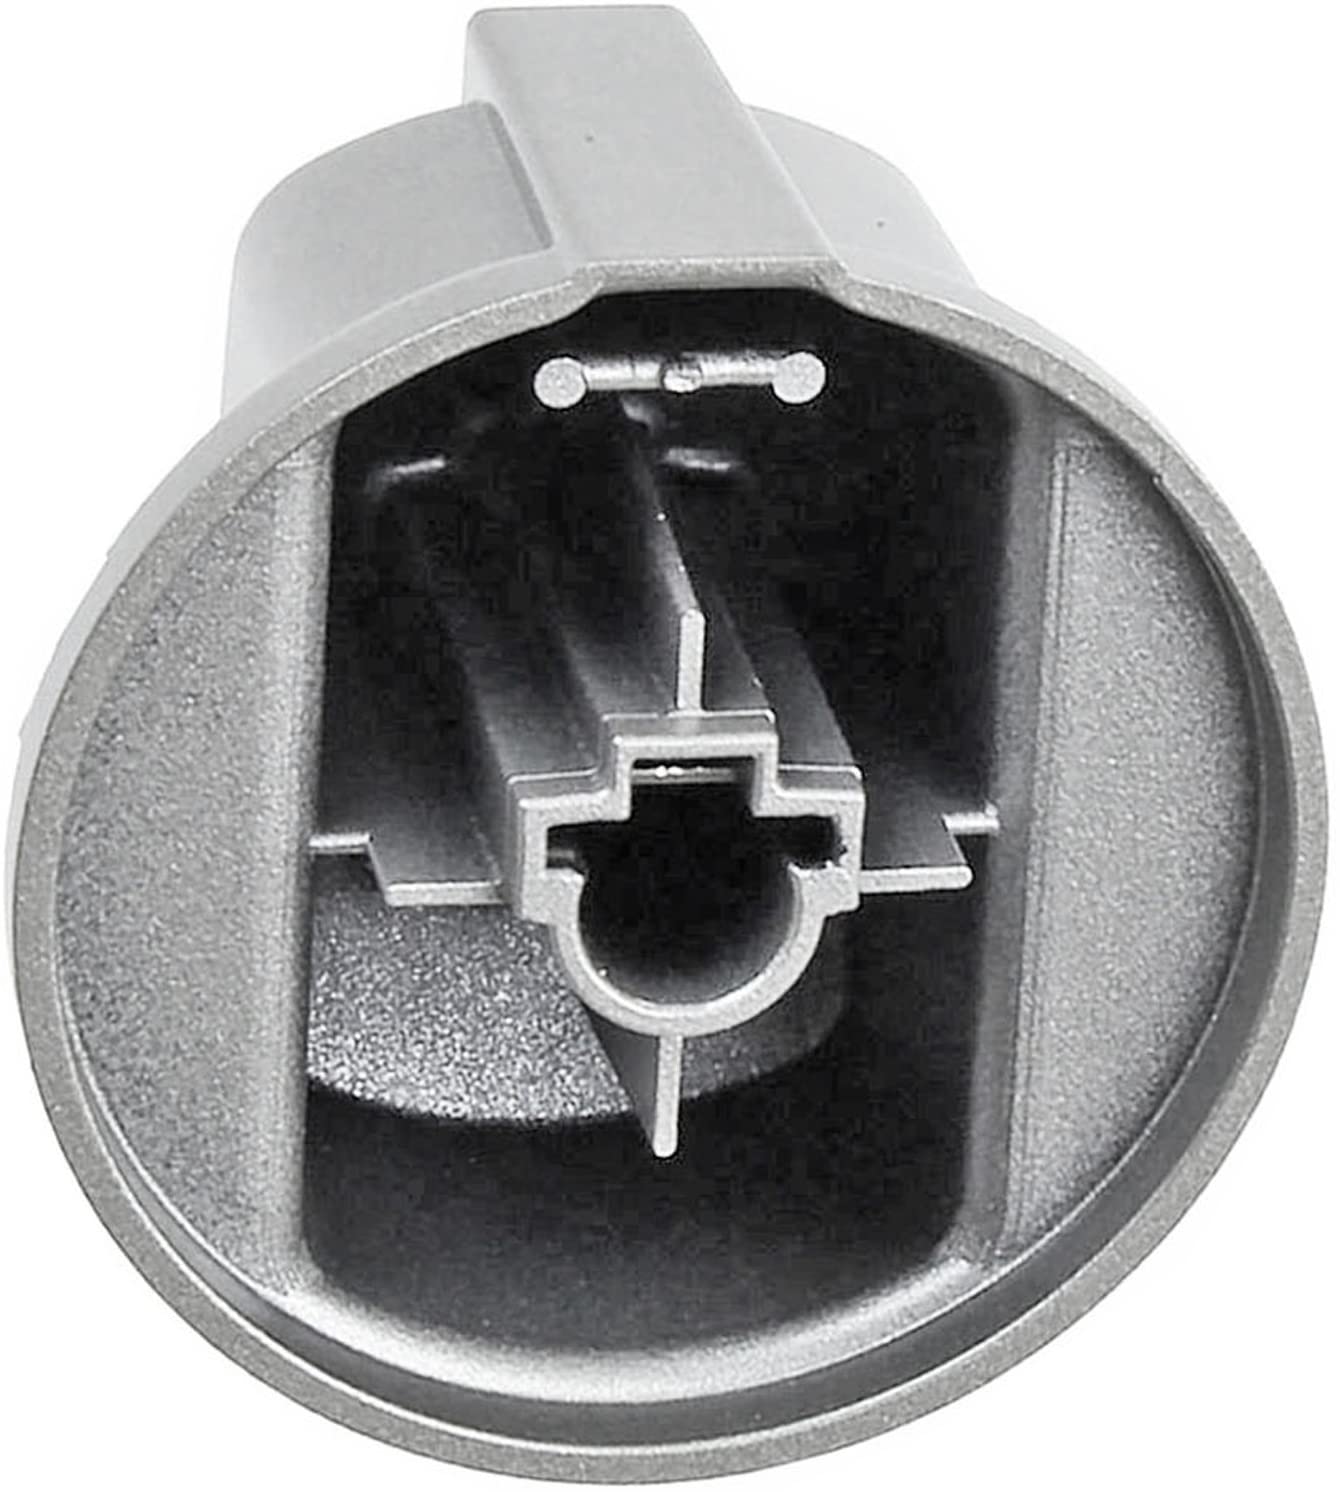 Control Knob Switch Button for HOTPOINT CIM53KCAIXGB Cooker Oven (Silver/INOX)